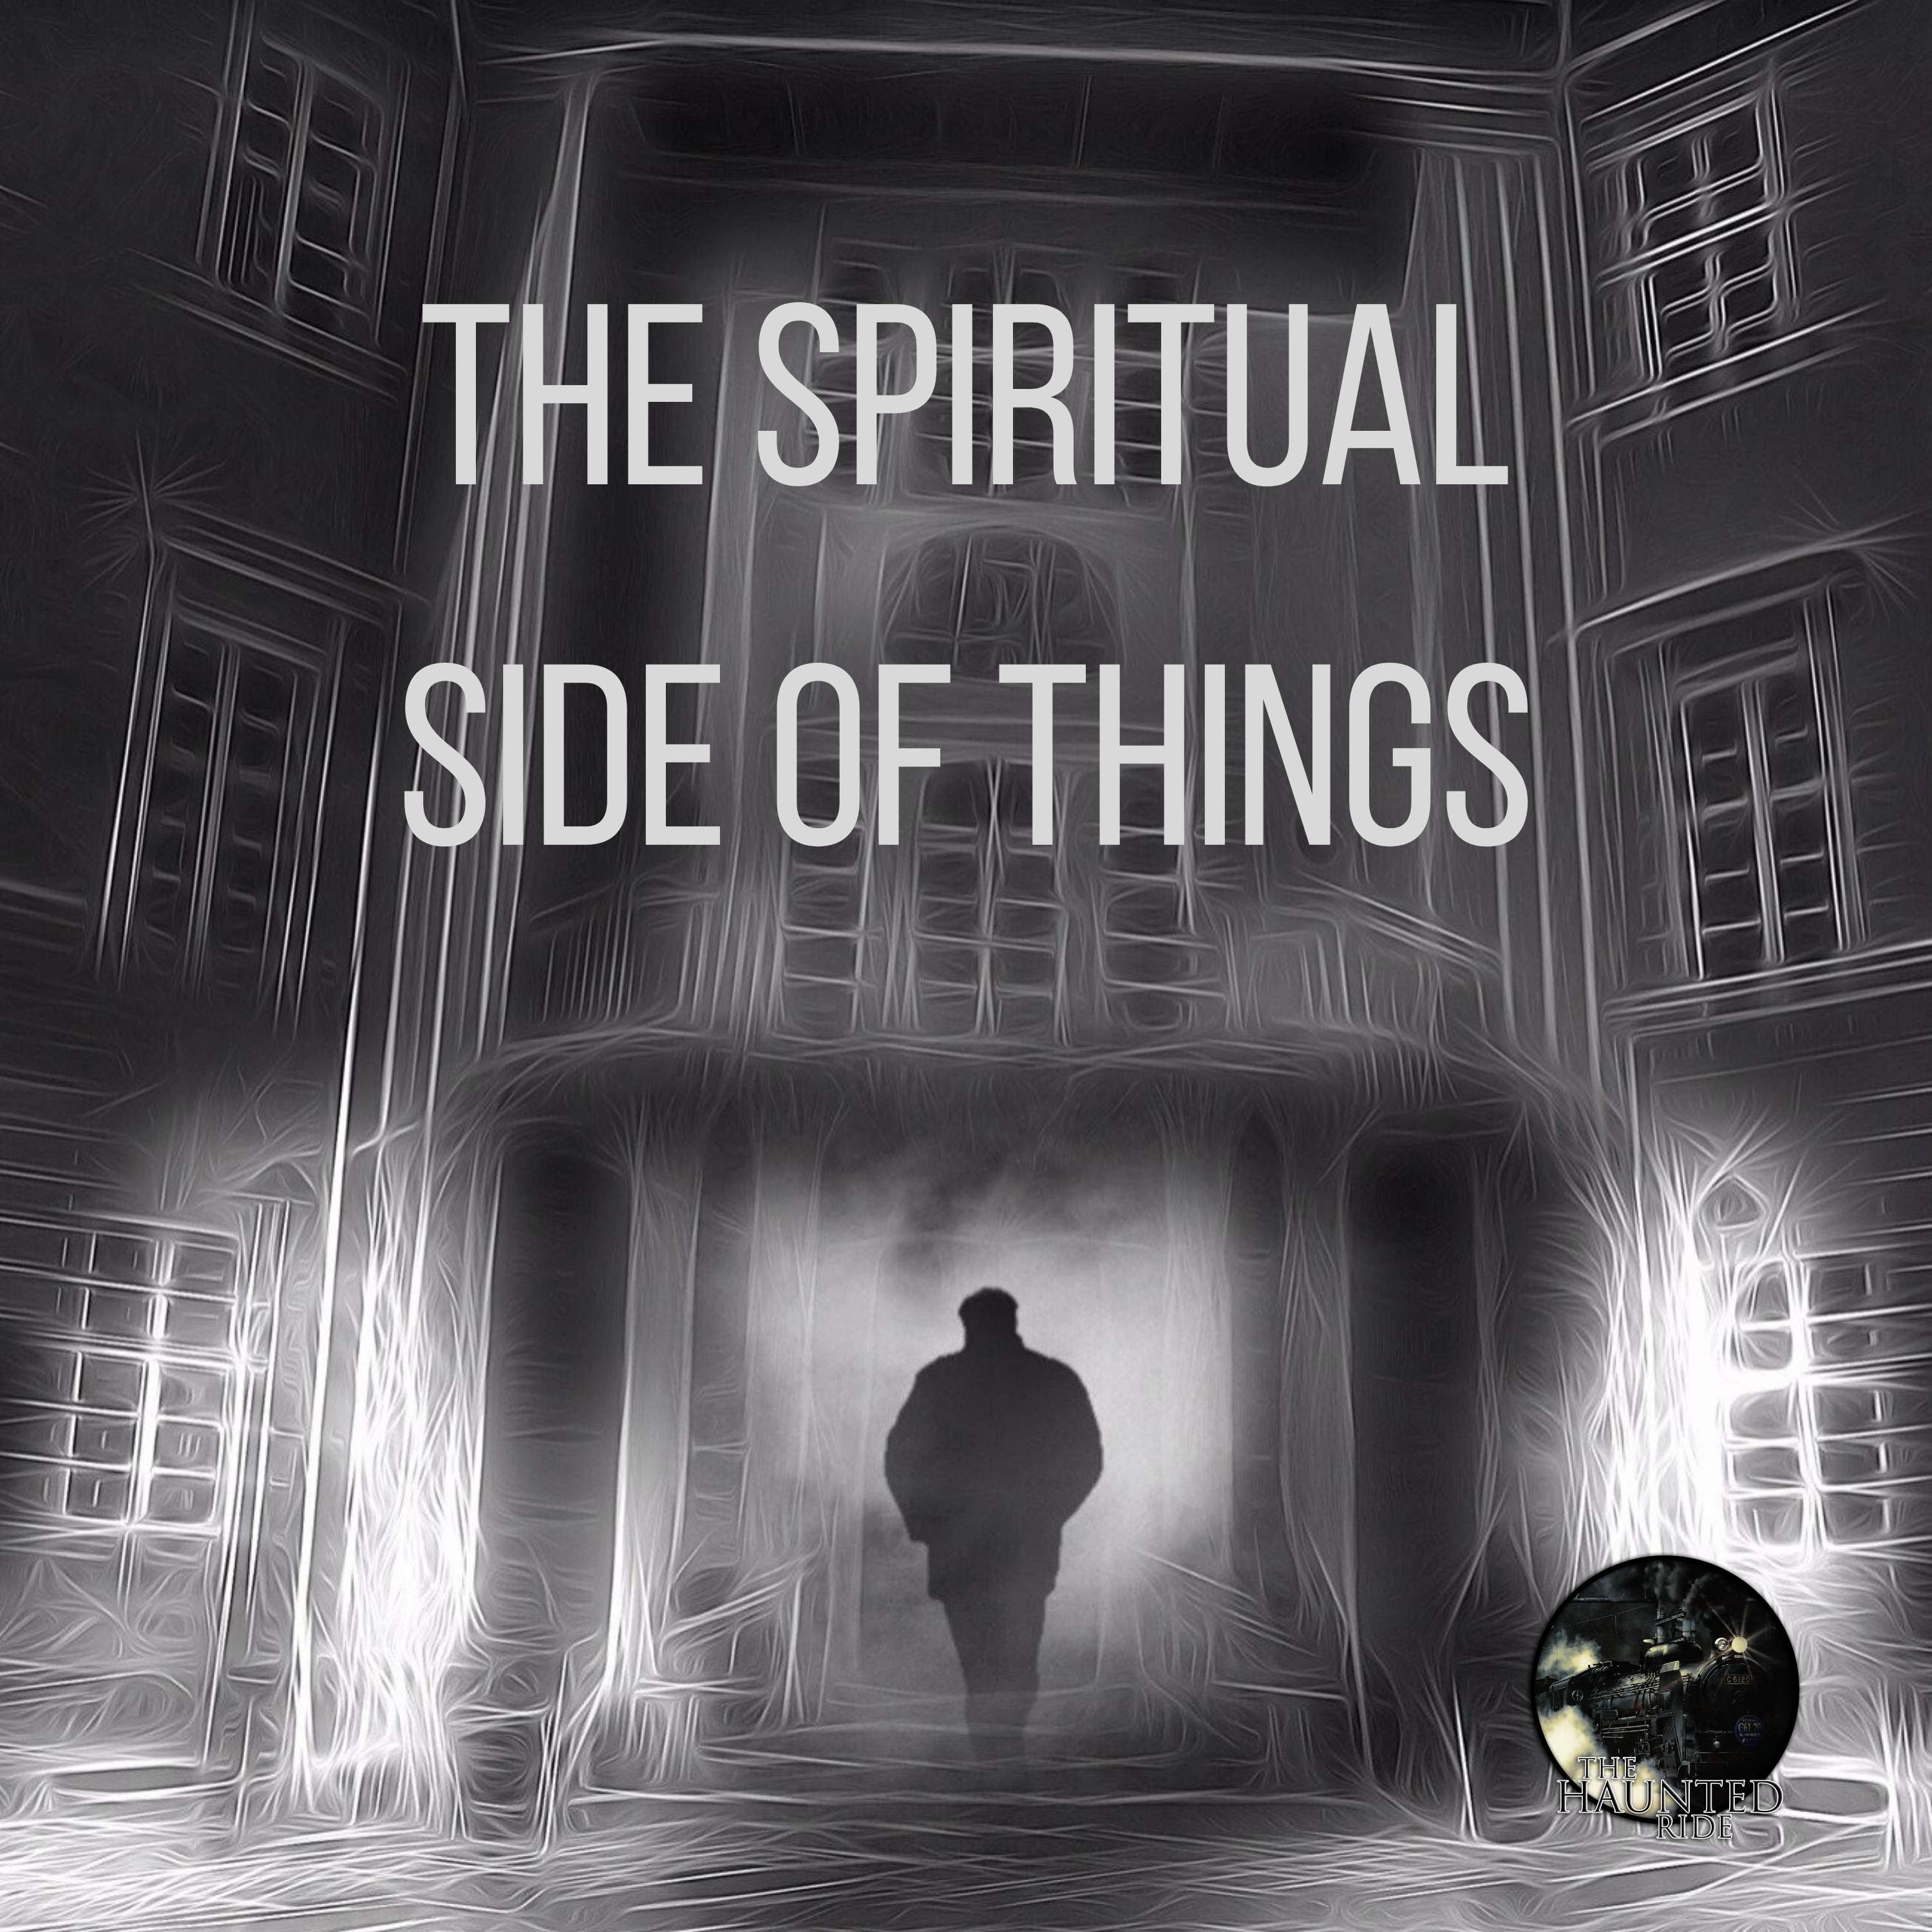 18: The Spiritual Side of Things